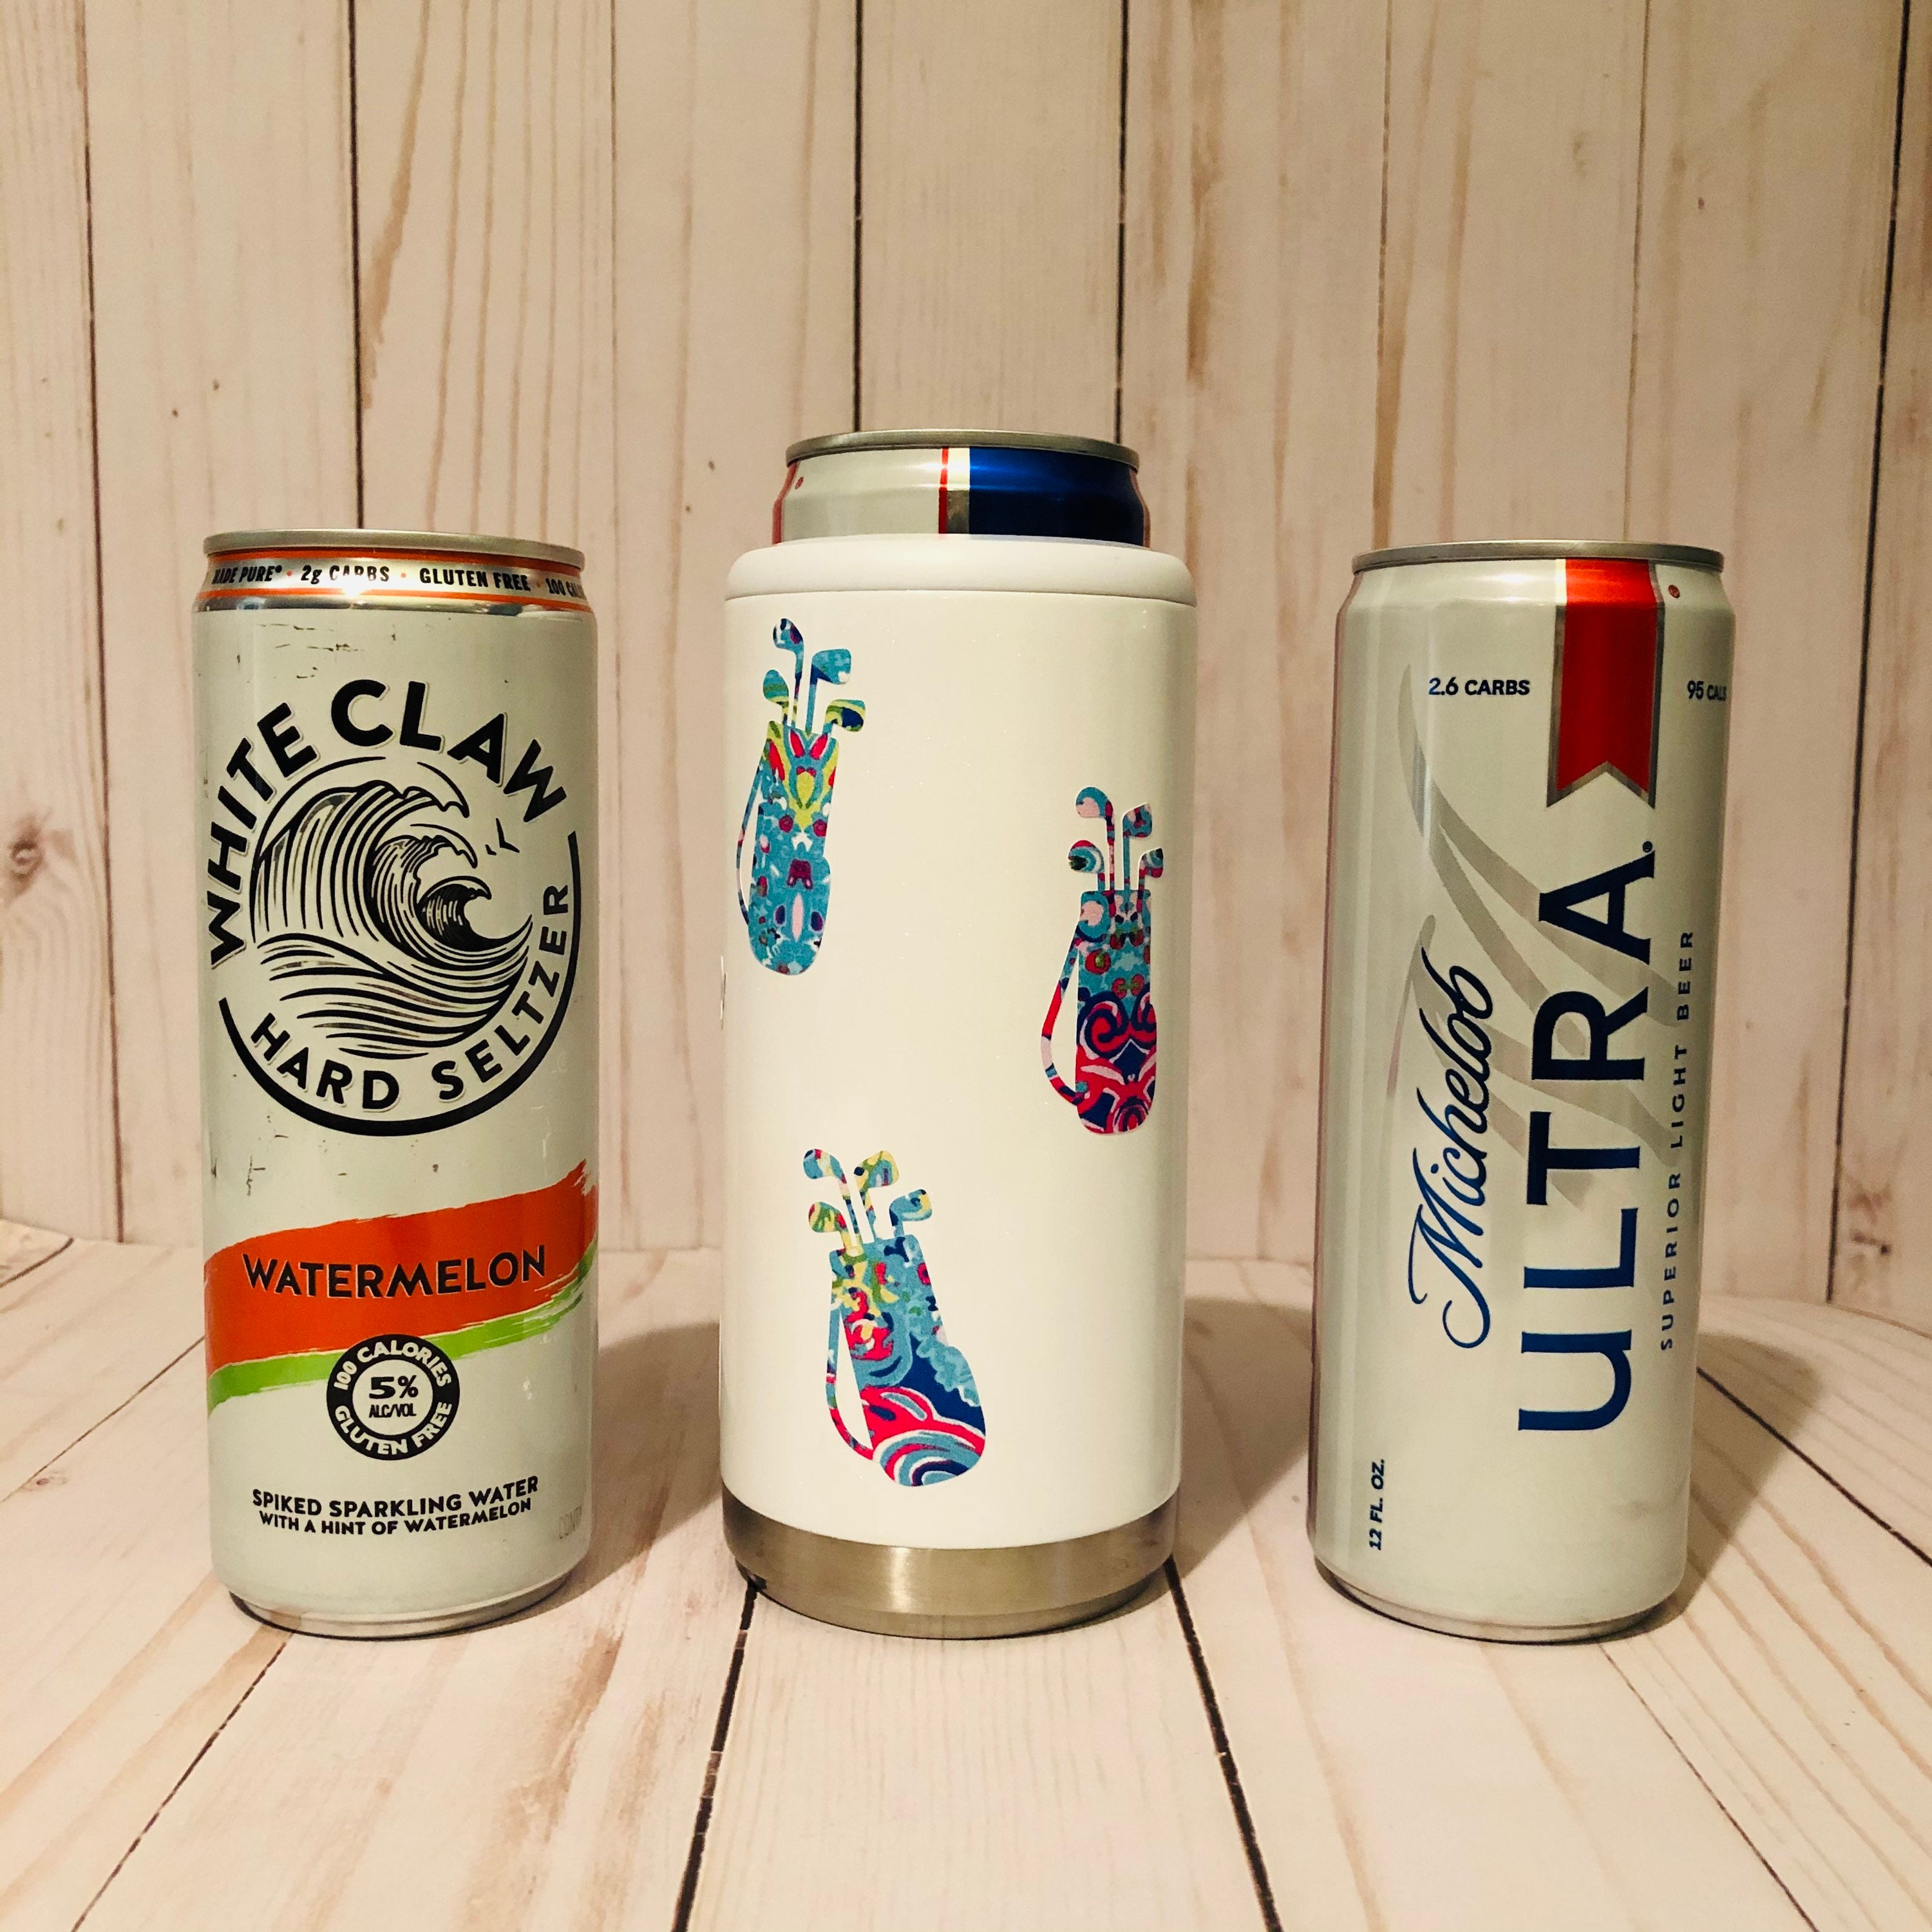 Municipal Waste - We made koozies for your White Claw.